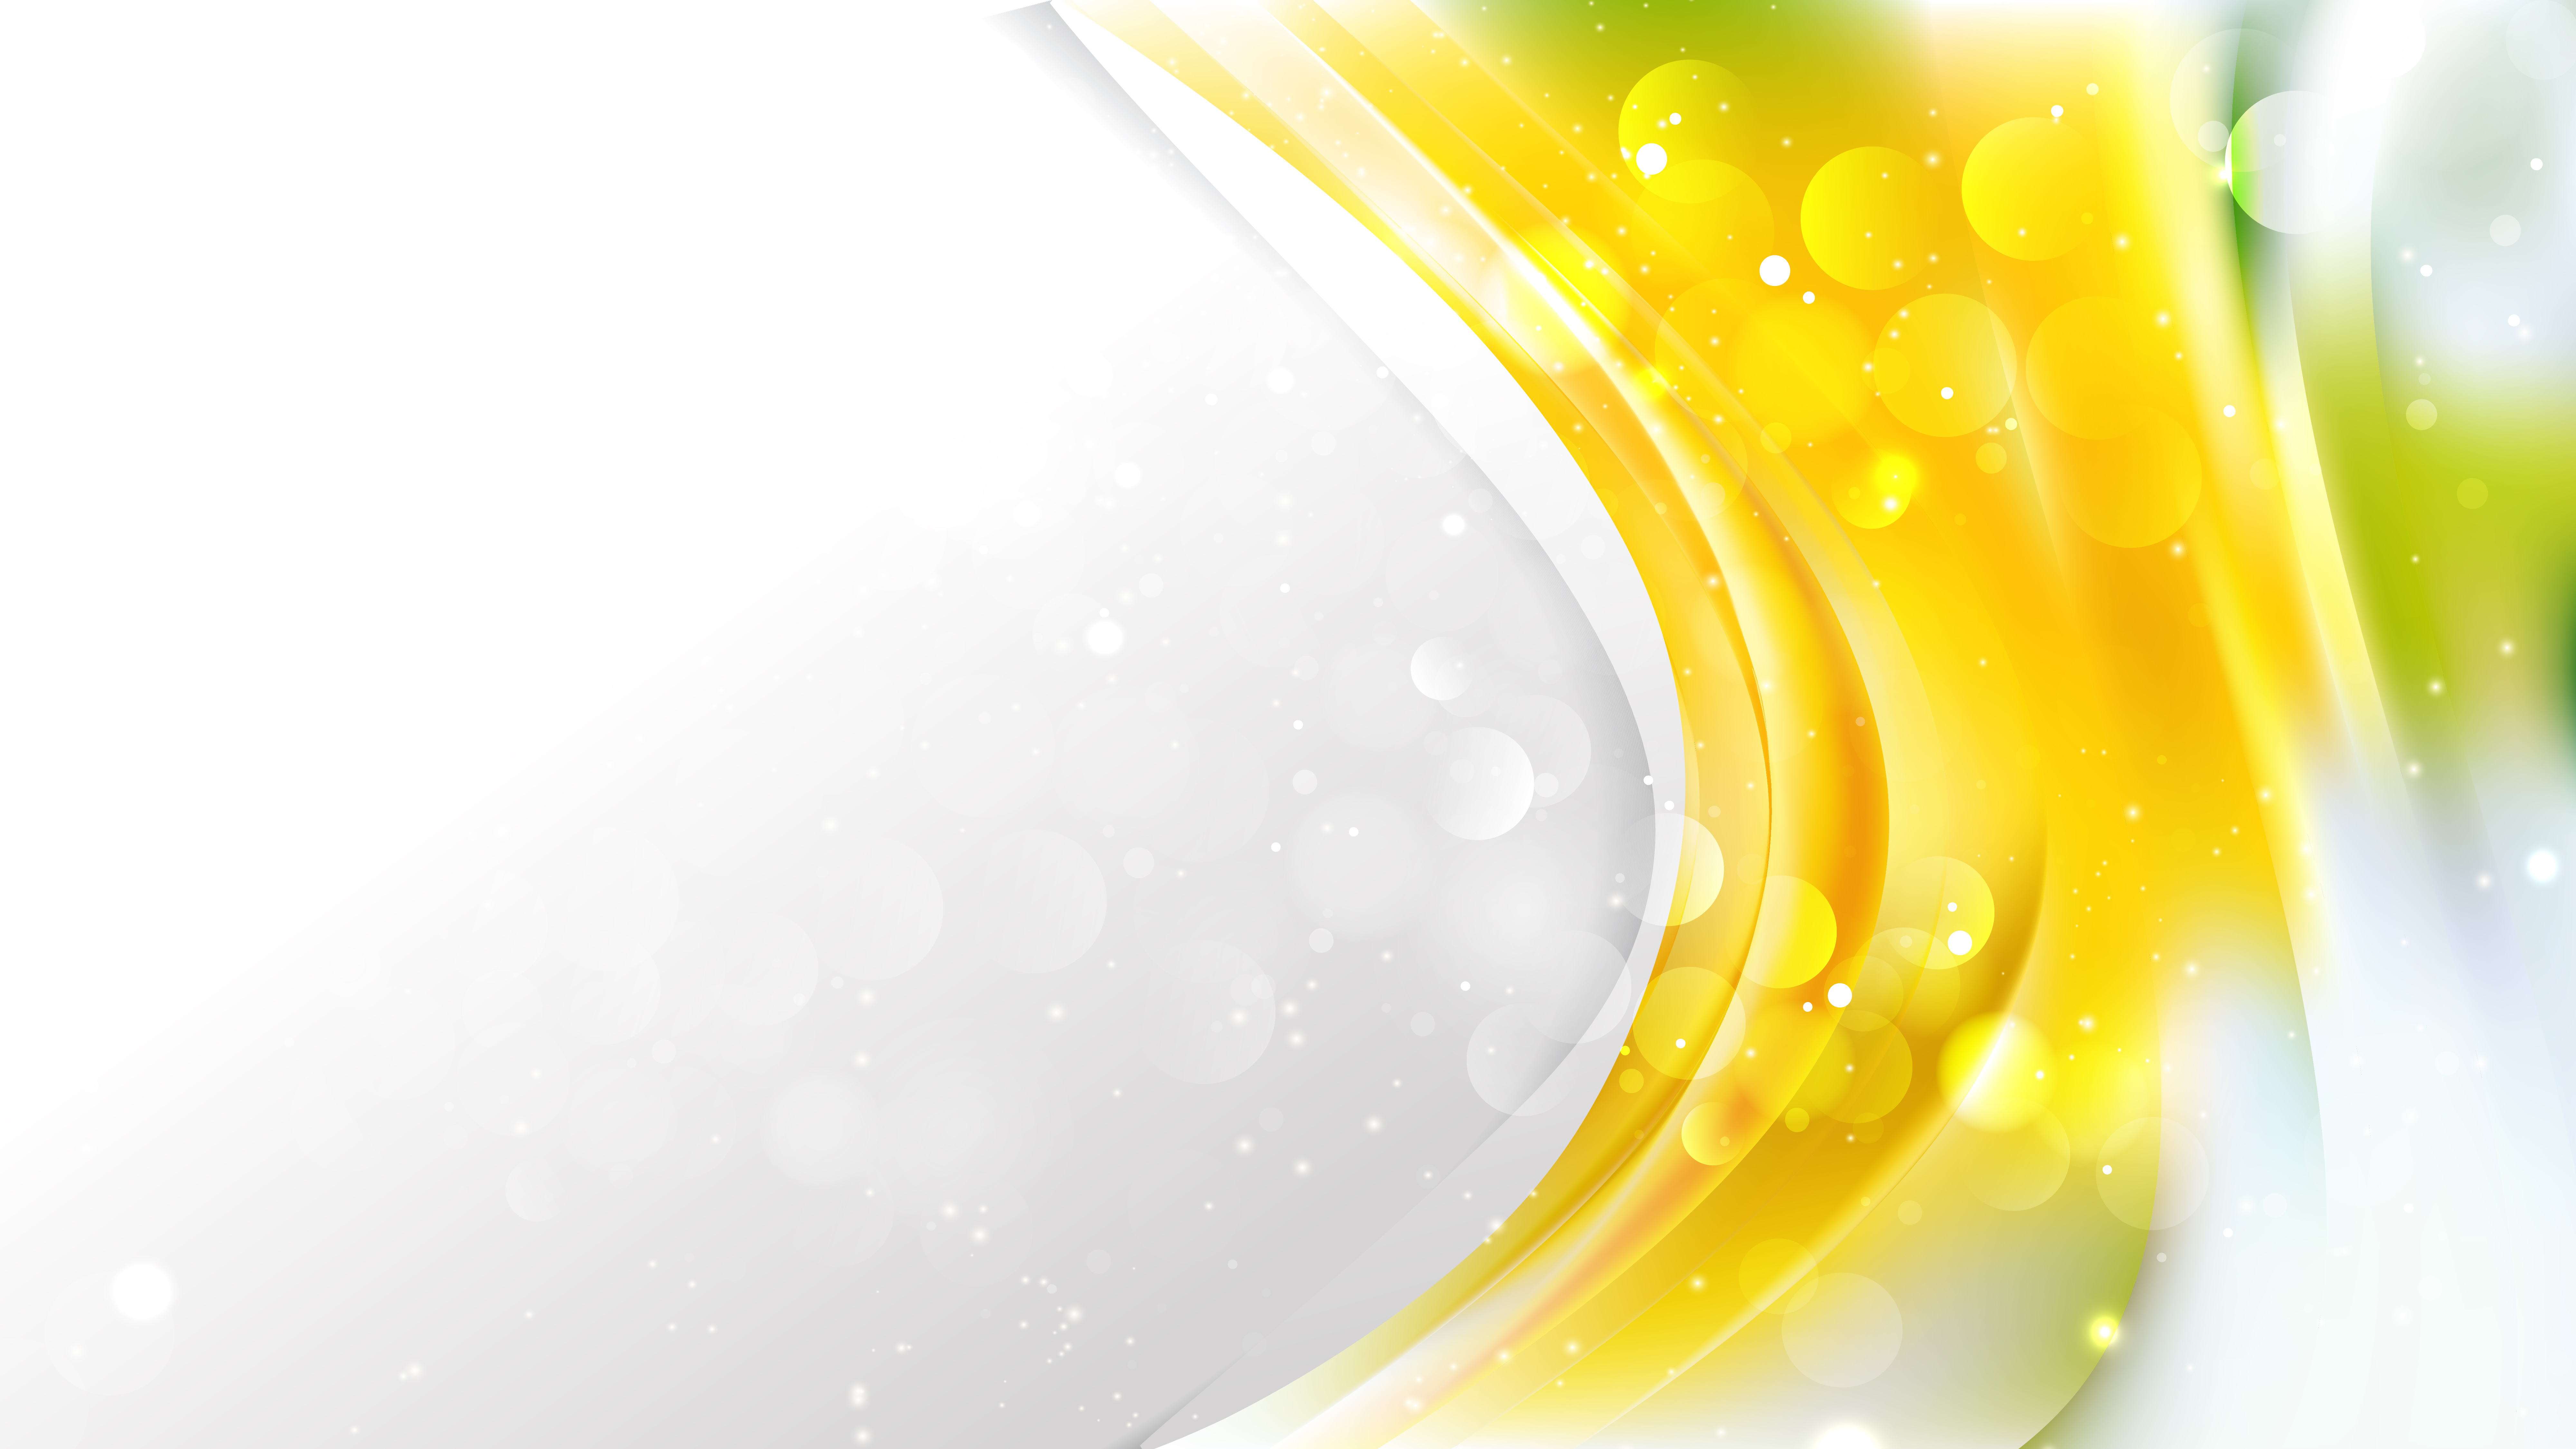 Free Abstract Yellow and White Brochure Design Vector Graphic